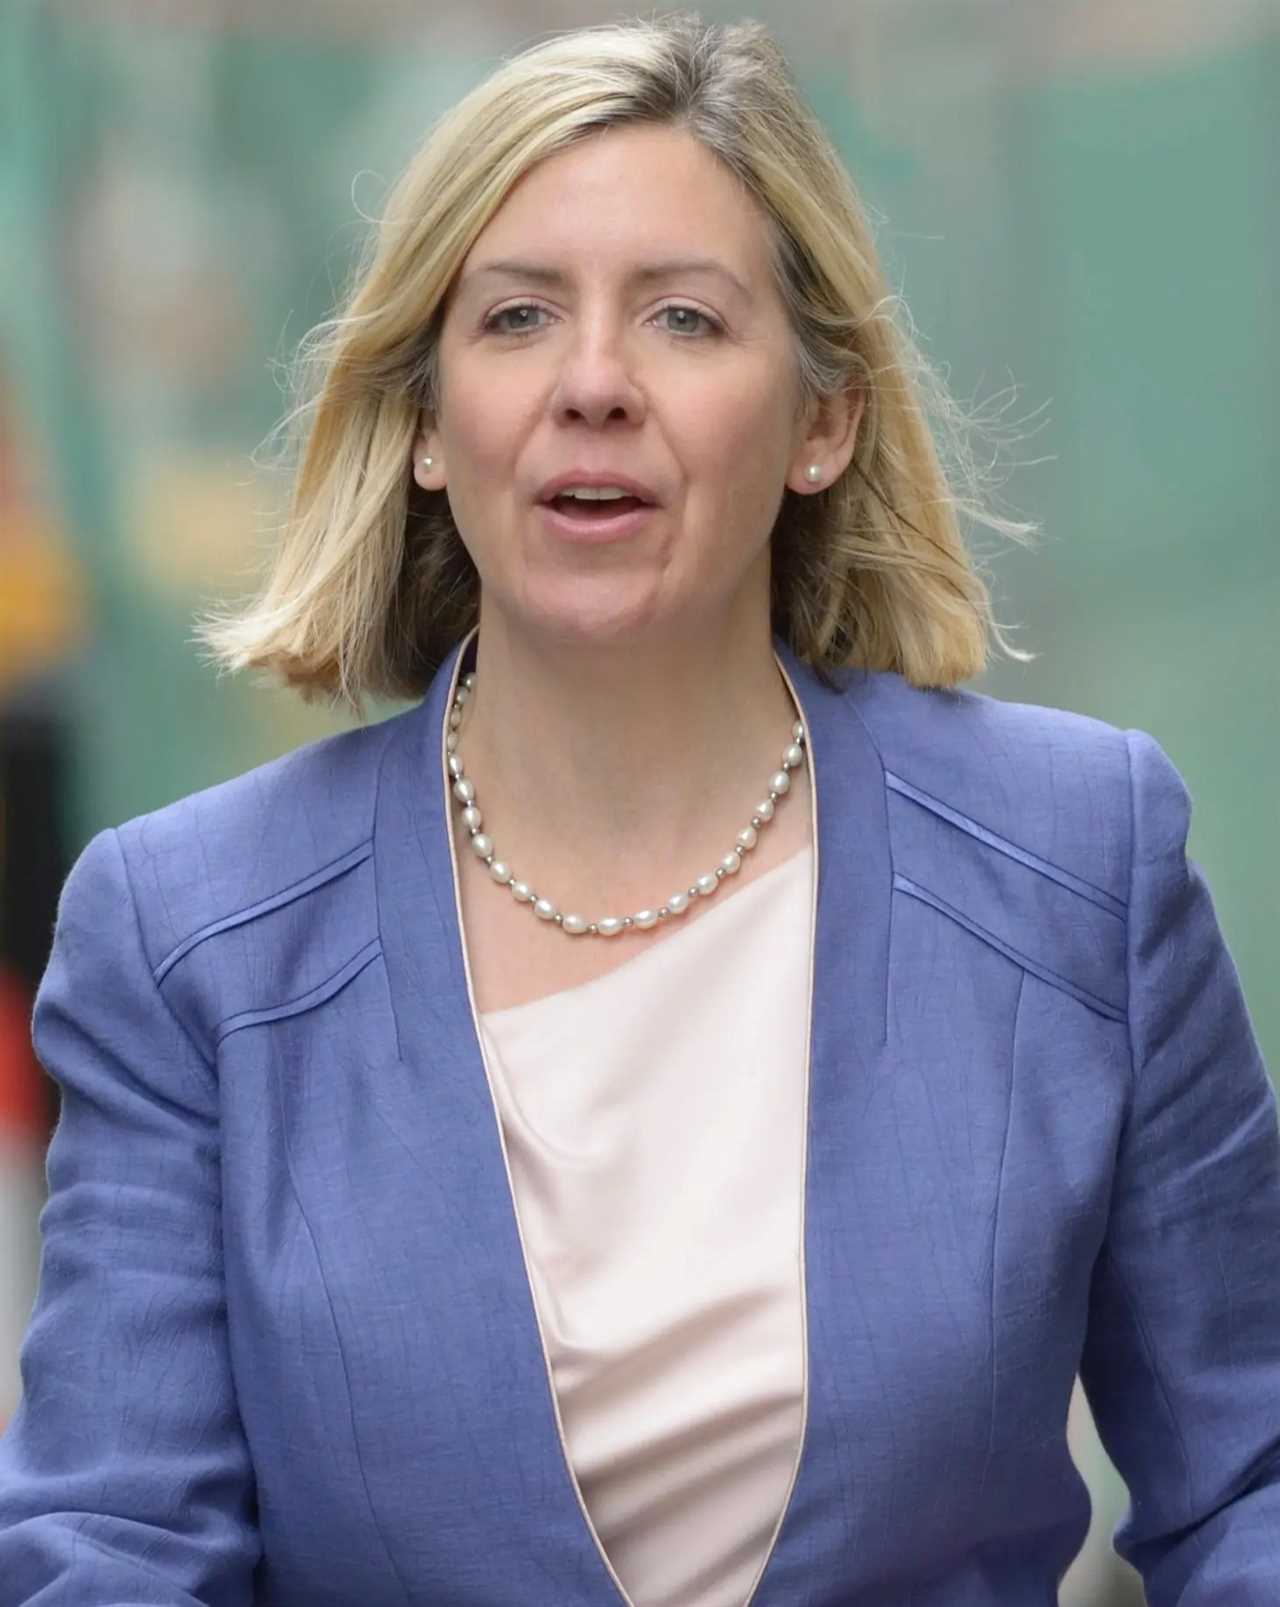 Shaken MP tells of horror after man threatened to blow her up during event in chilling threat